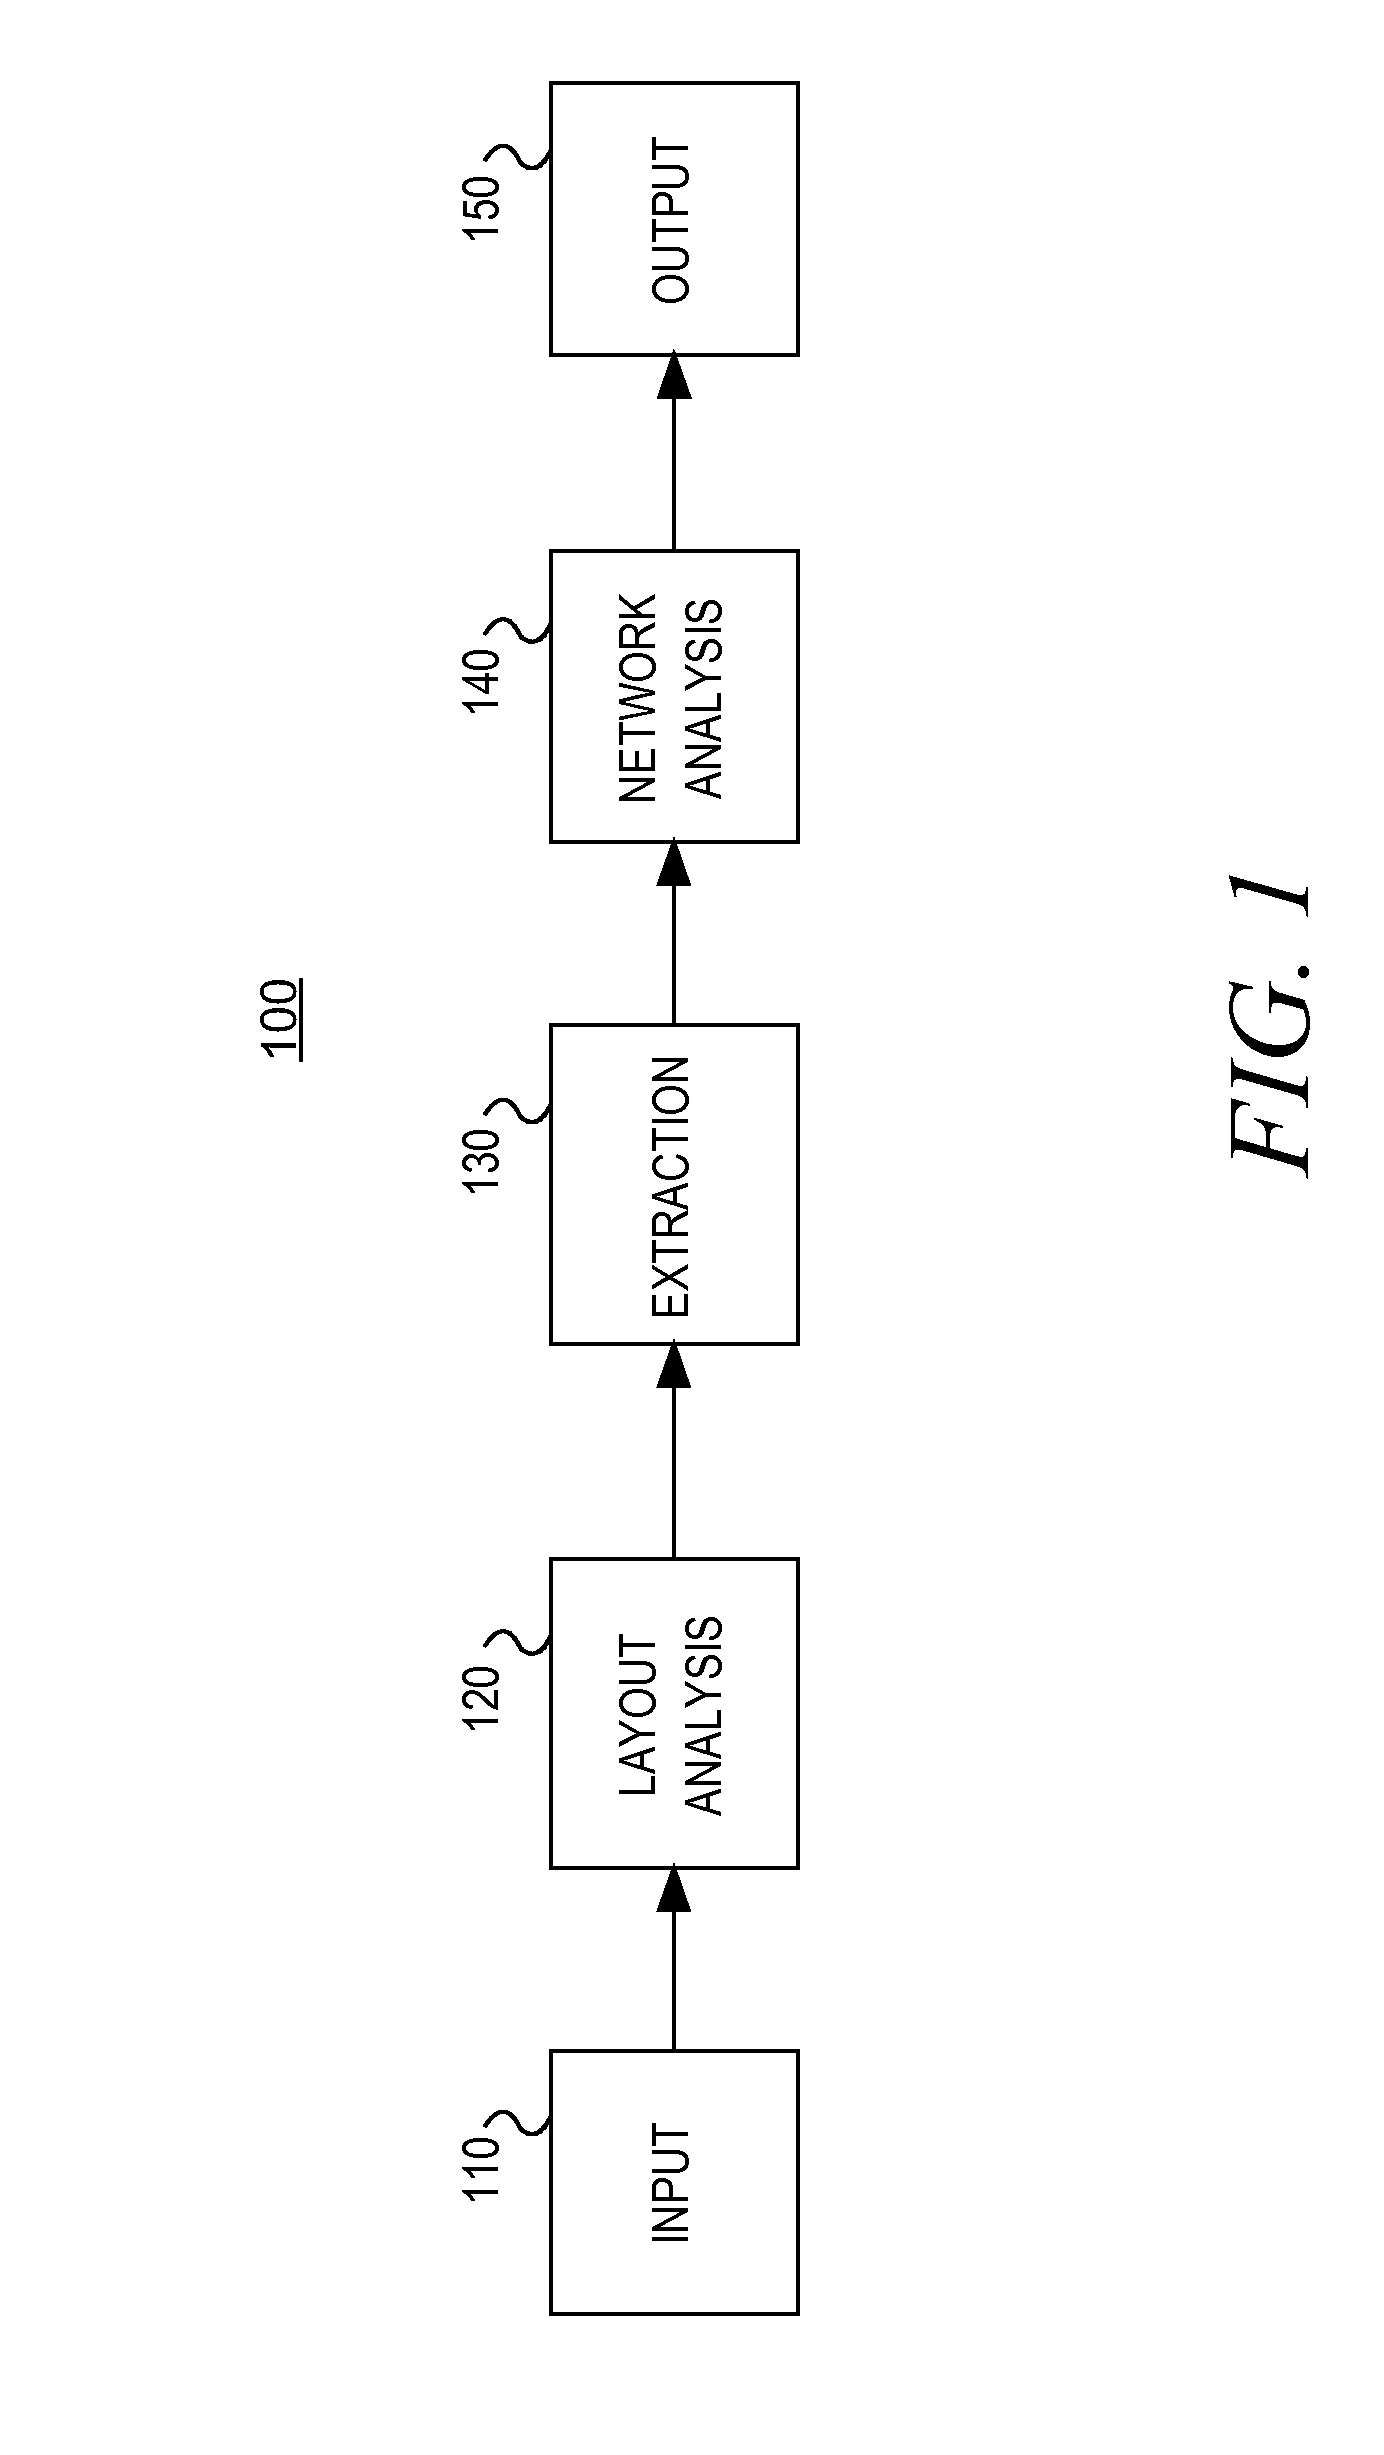 Electrostatic discharge device verification in an integrated circuit